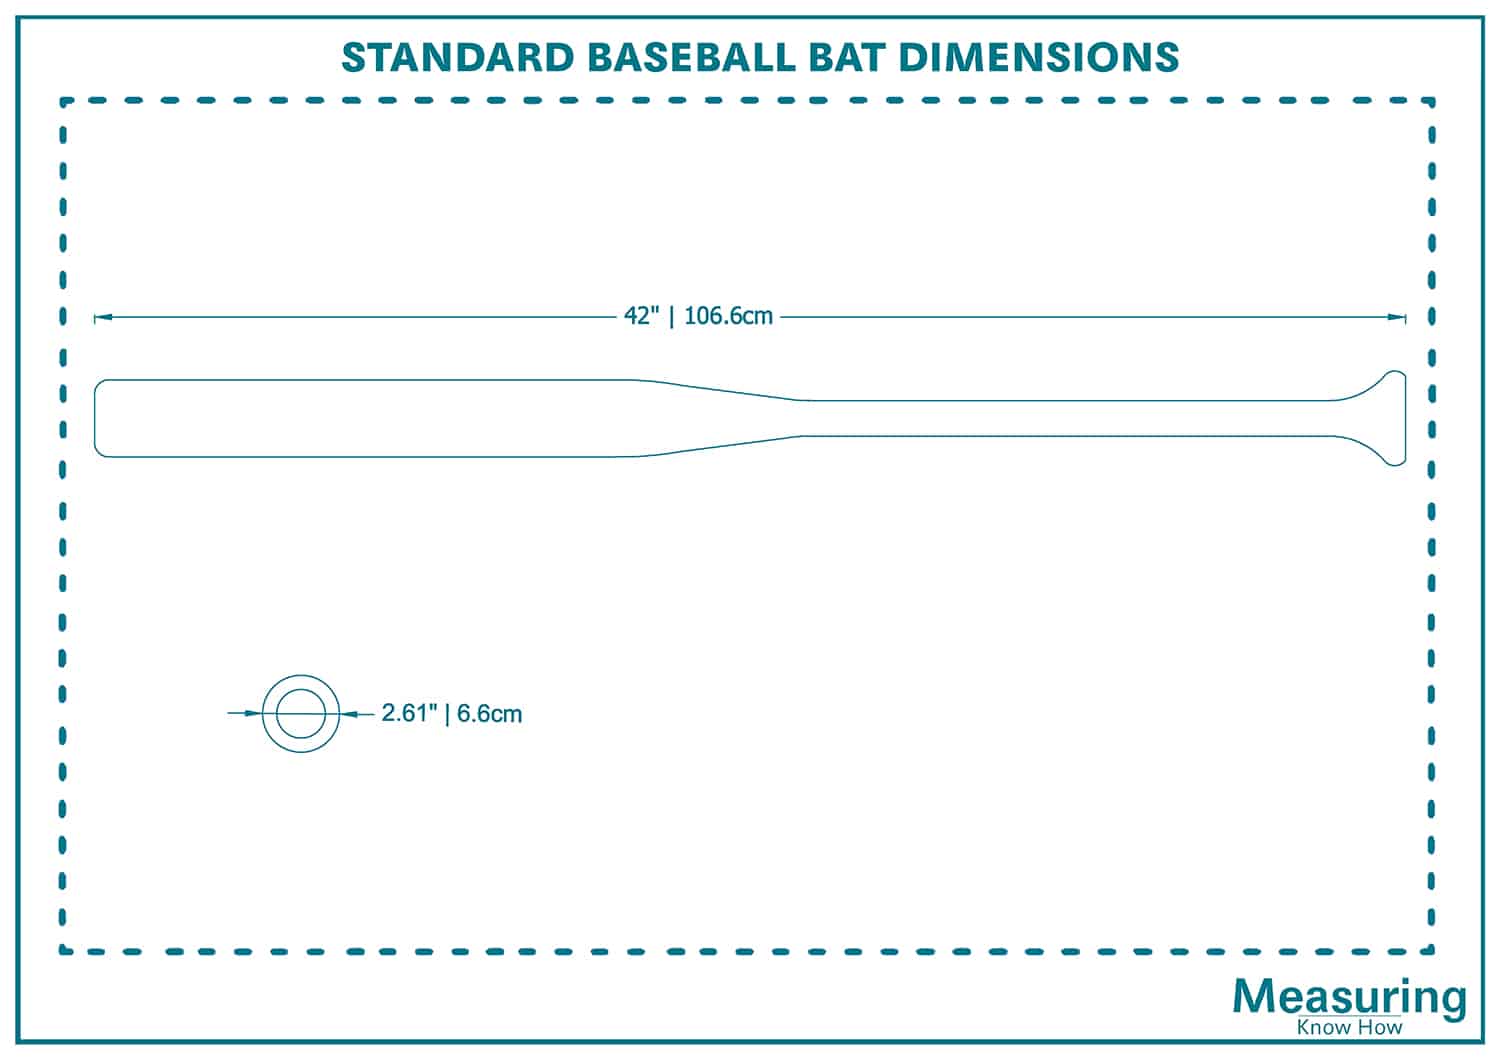 Standard Baseball Bat Weights (with - MeasuringKnowHow